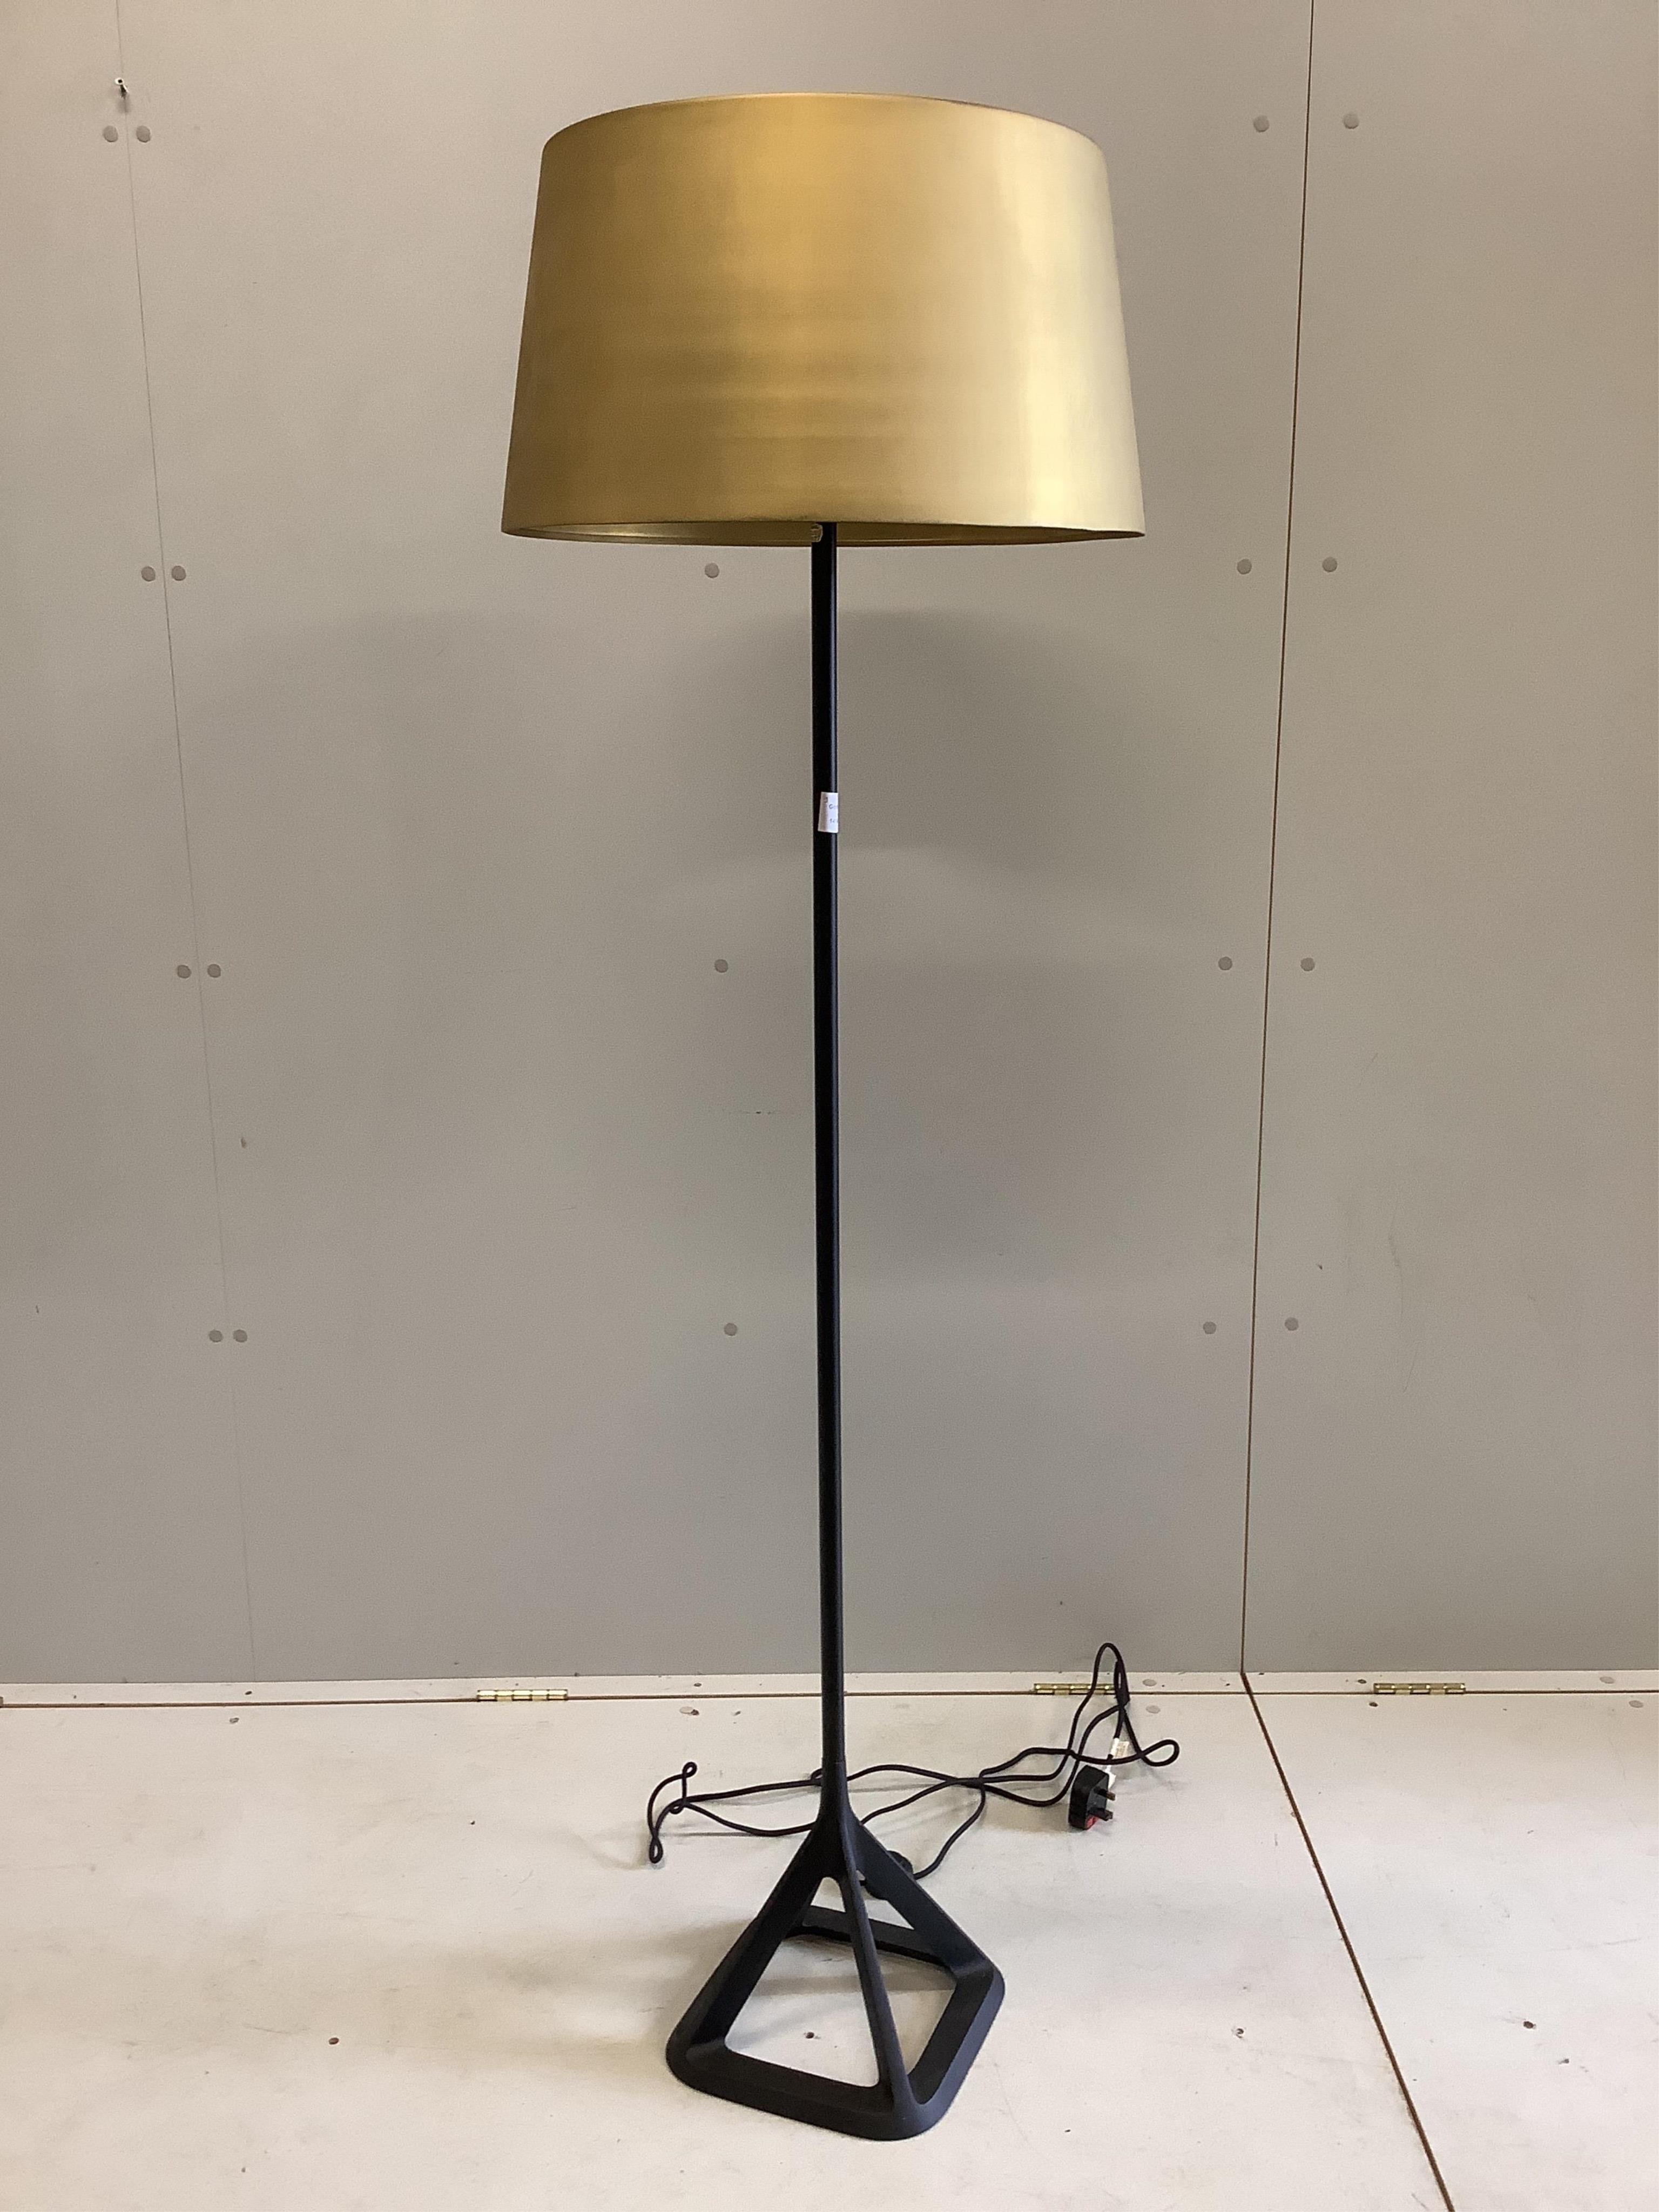 A Tom Dixon standard lamp with satin shade